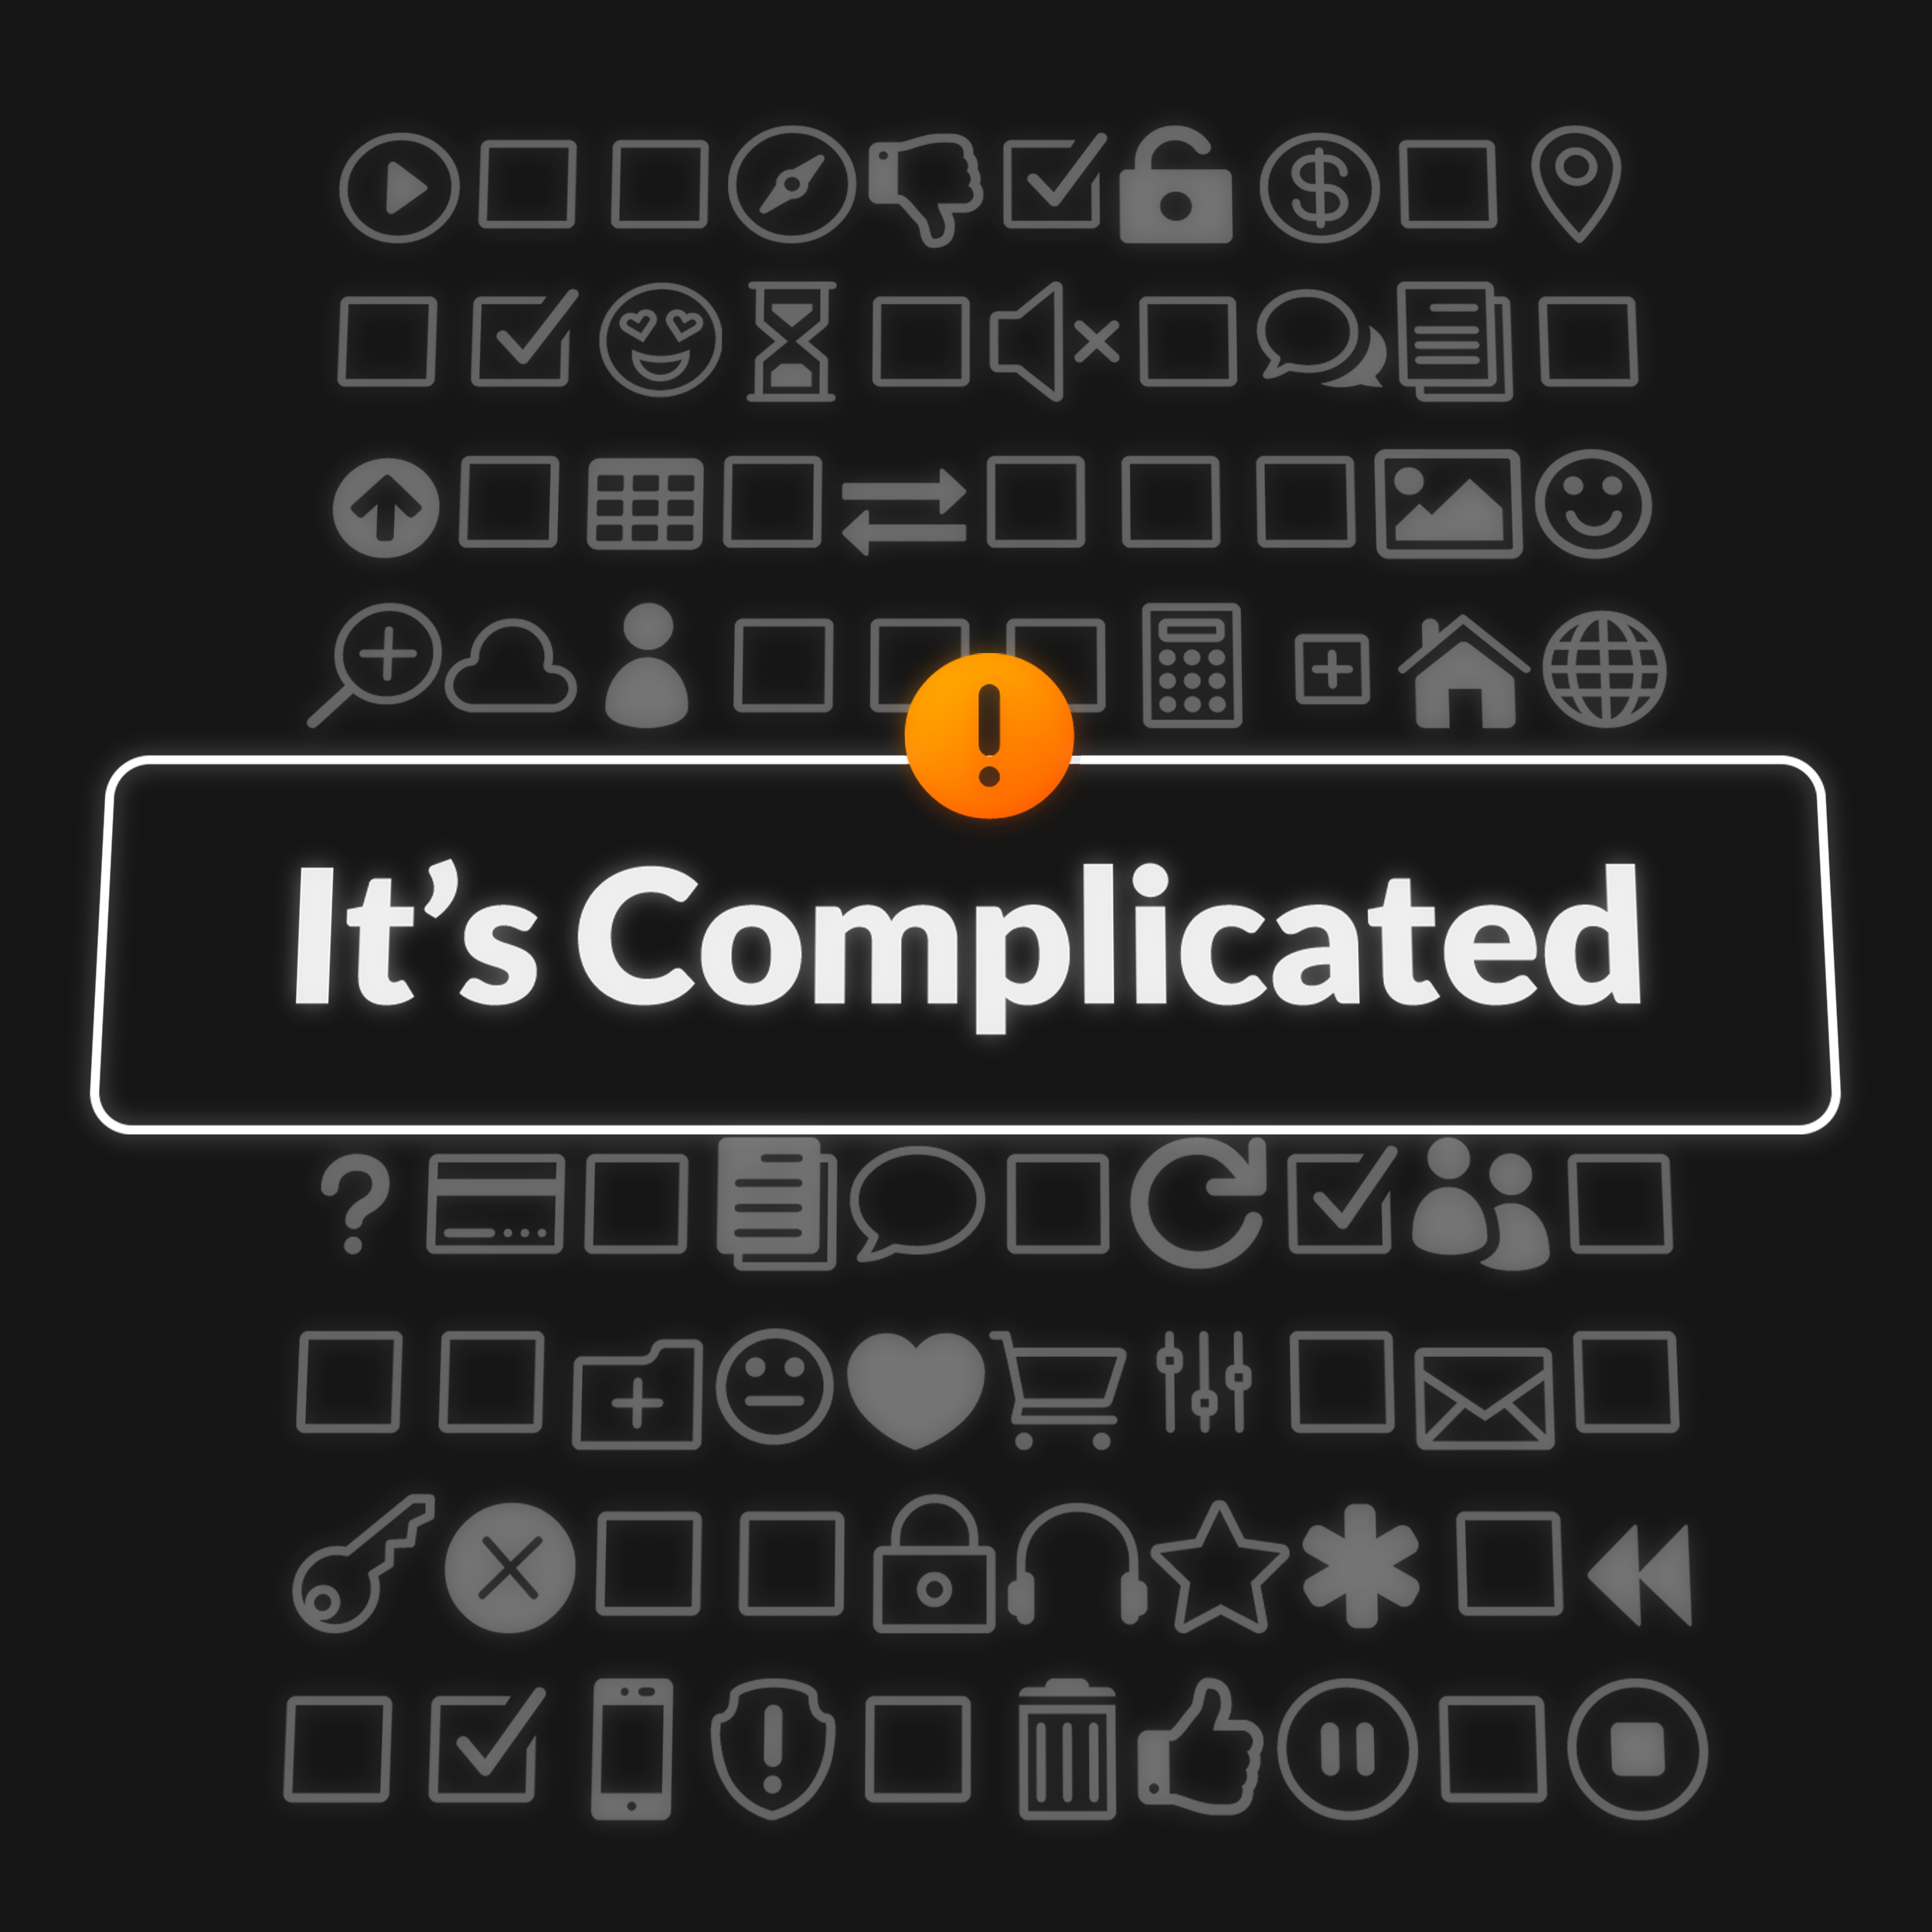 IT'S COMPLICATED | Marriage | June 26, 2022